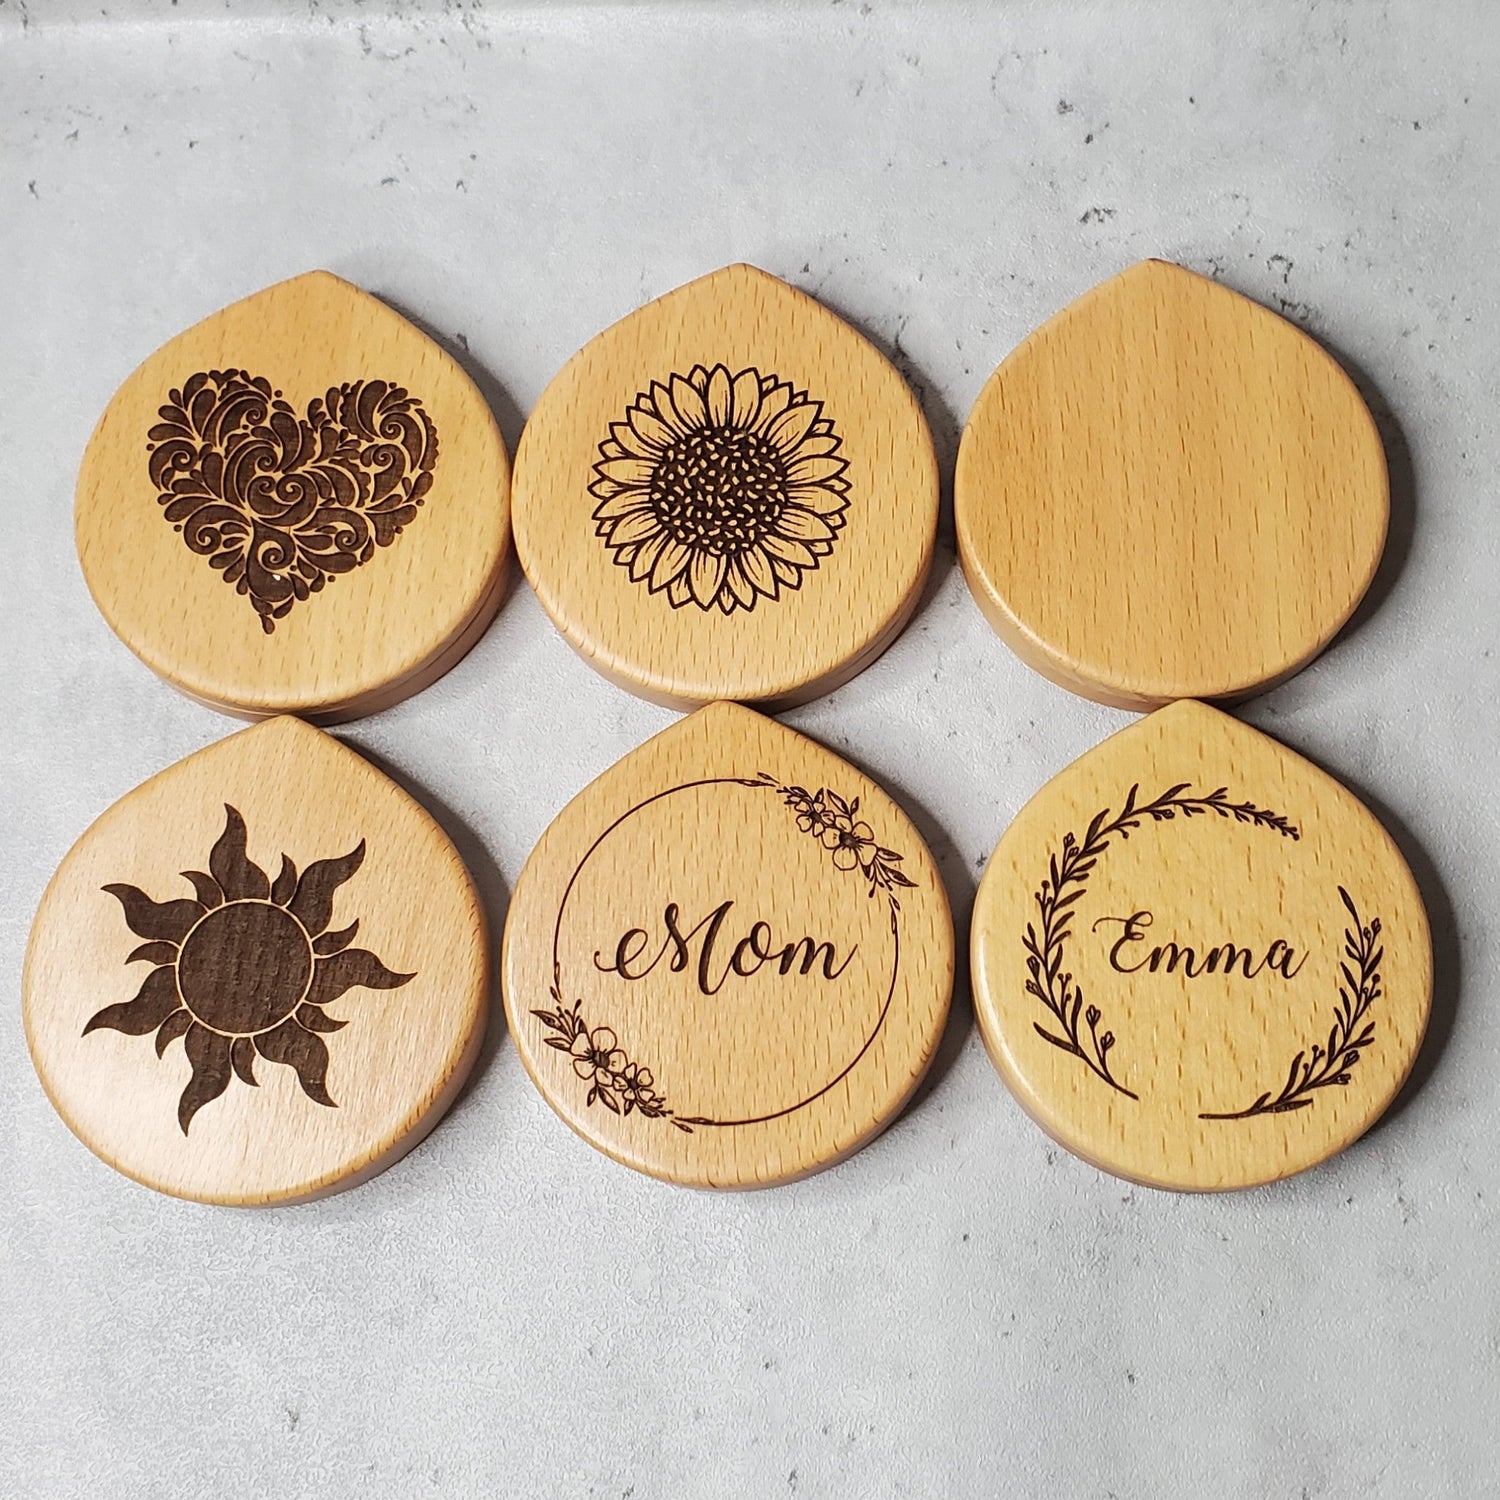 Engraved mirror collection, introduces some of the engraving ideas, a heart, a sunflower, a  sun, or your name in a decorative round frame